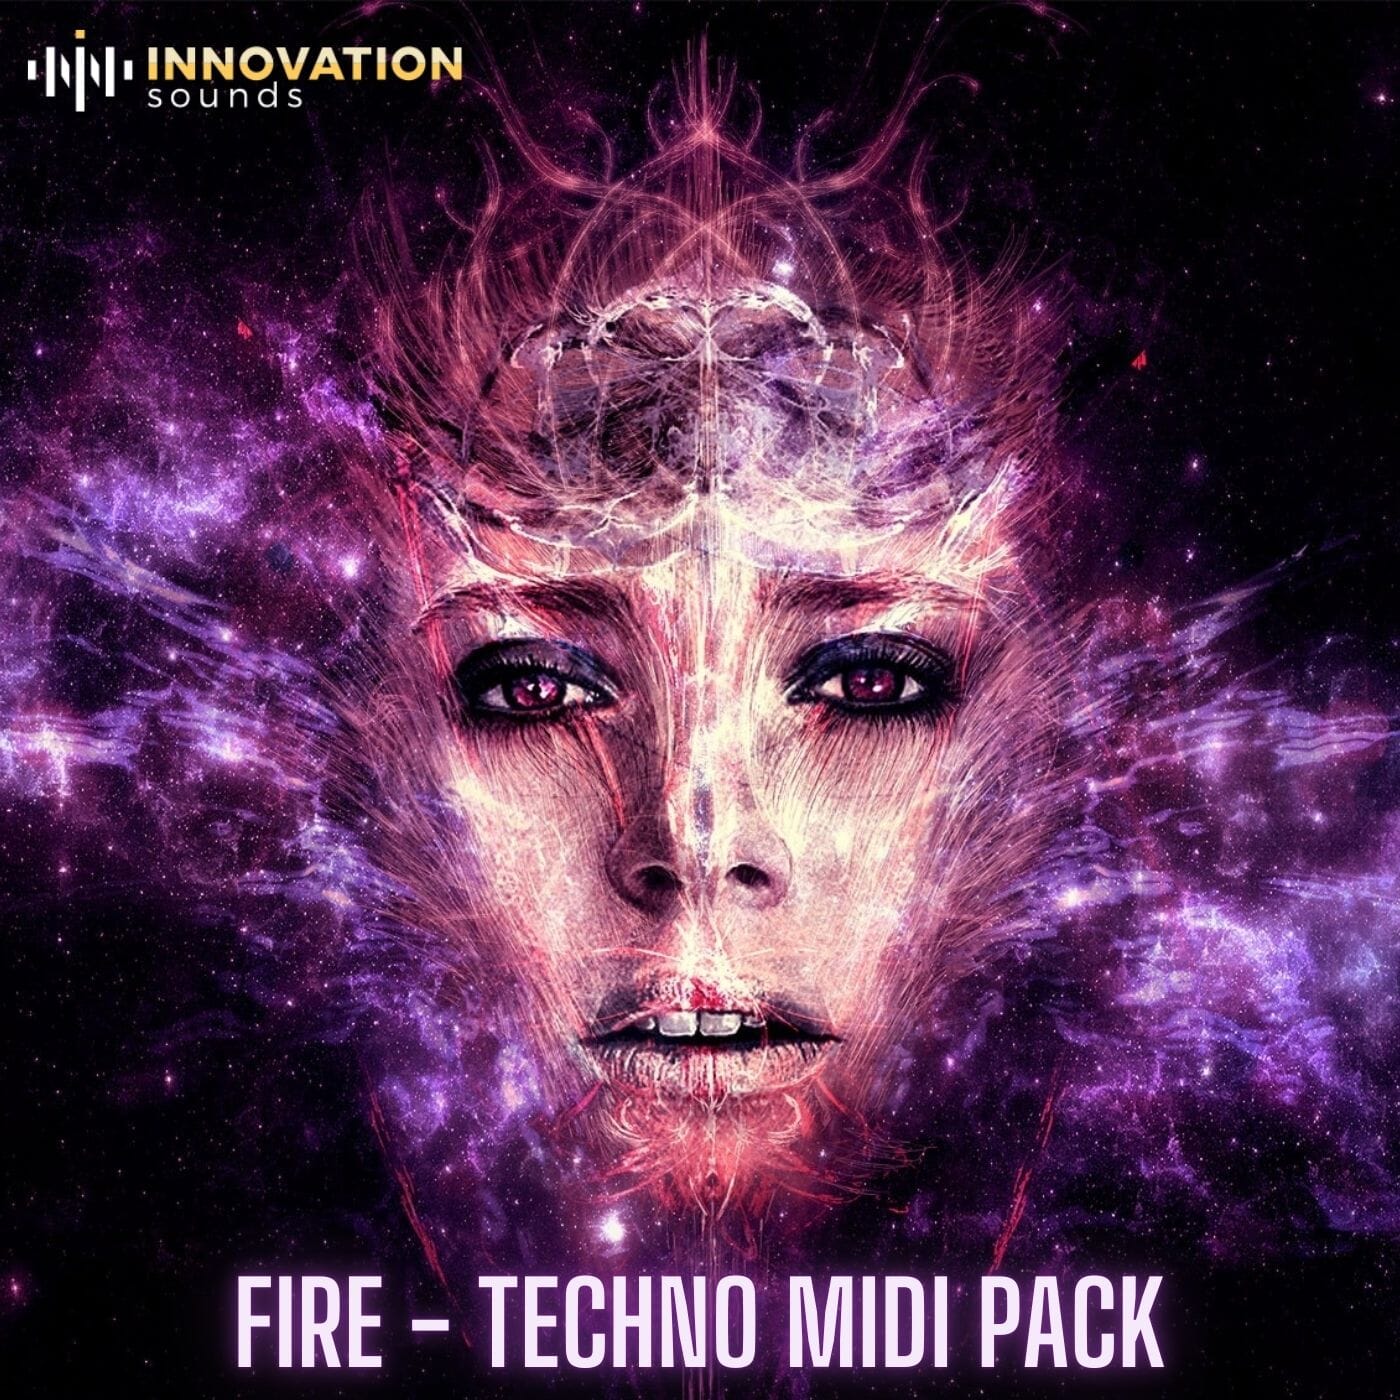 Fire - Techno MIDI Pack (Midi & Wave Loops) Sample Pack Innovation Sounds